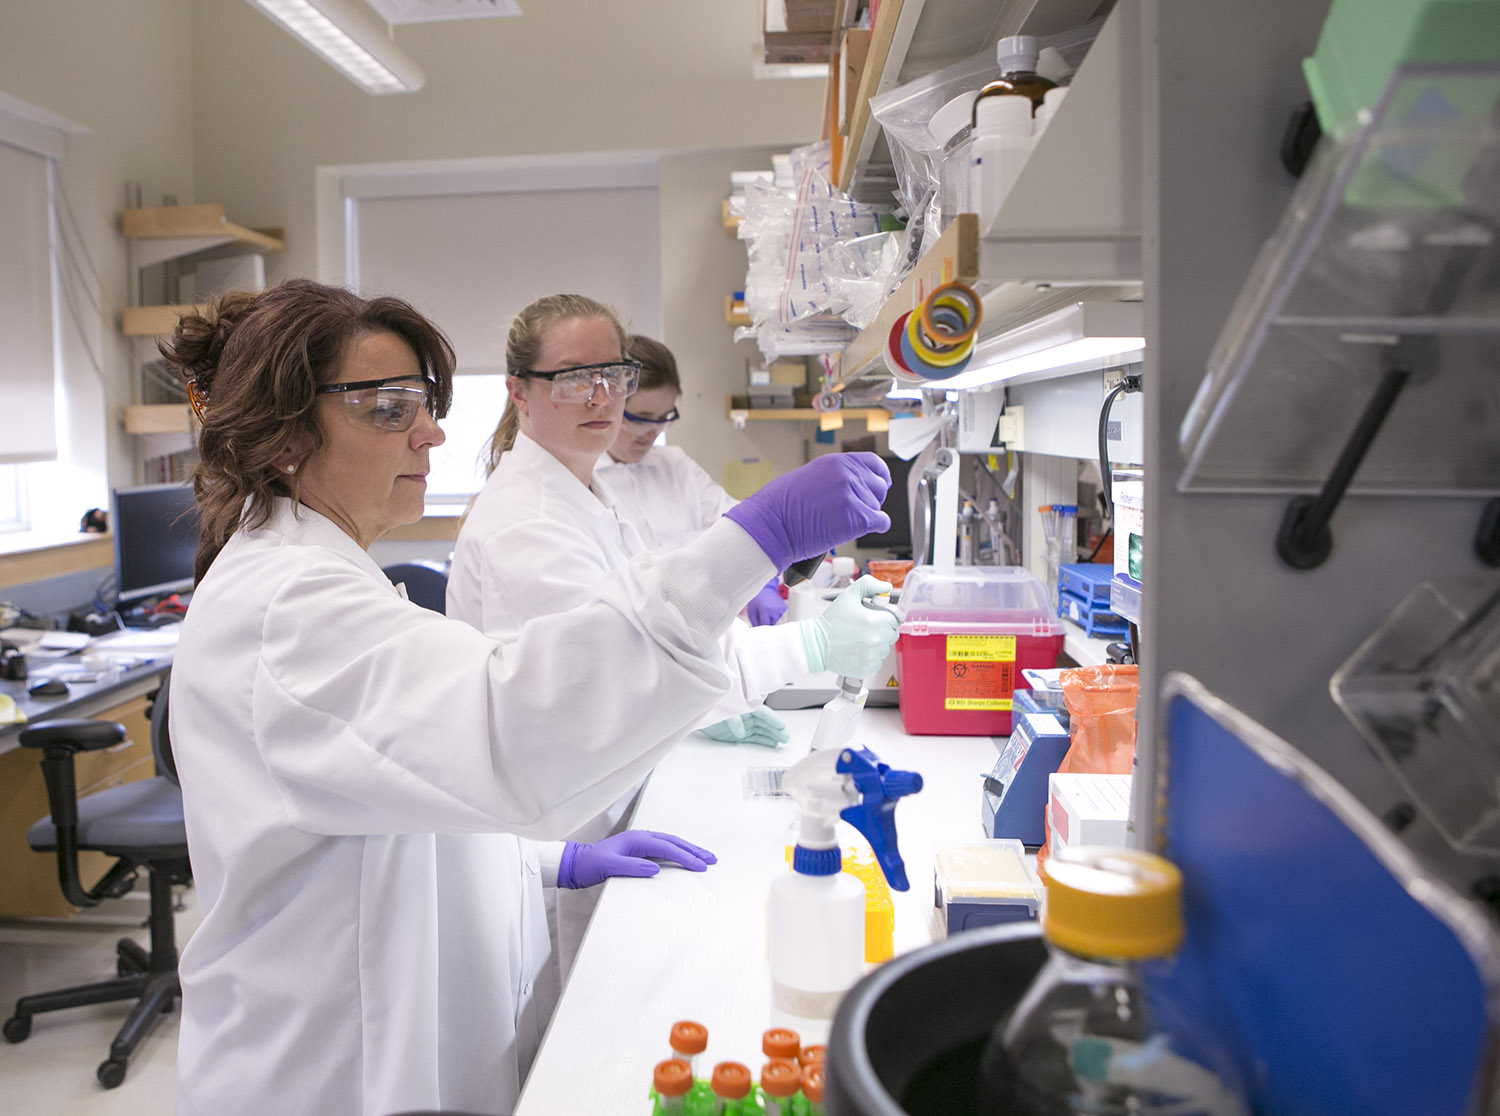 Photograph of three women wearing white coats, goggles and gloves and working at a lab bench.